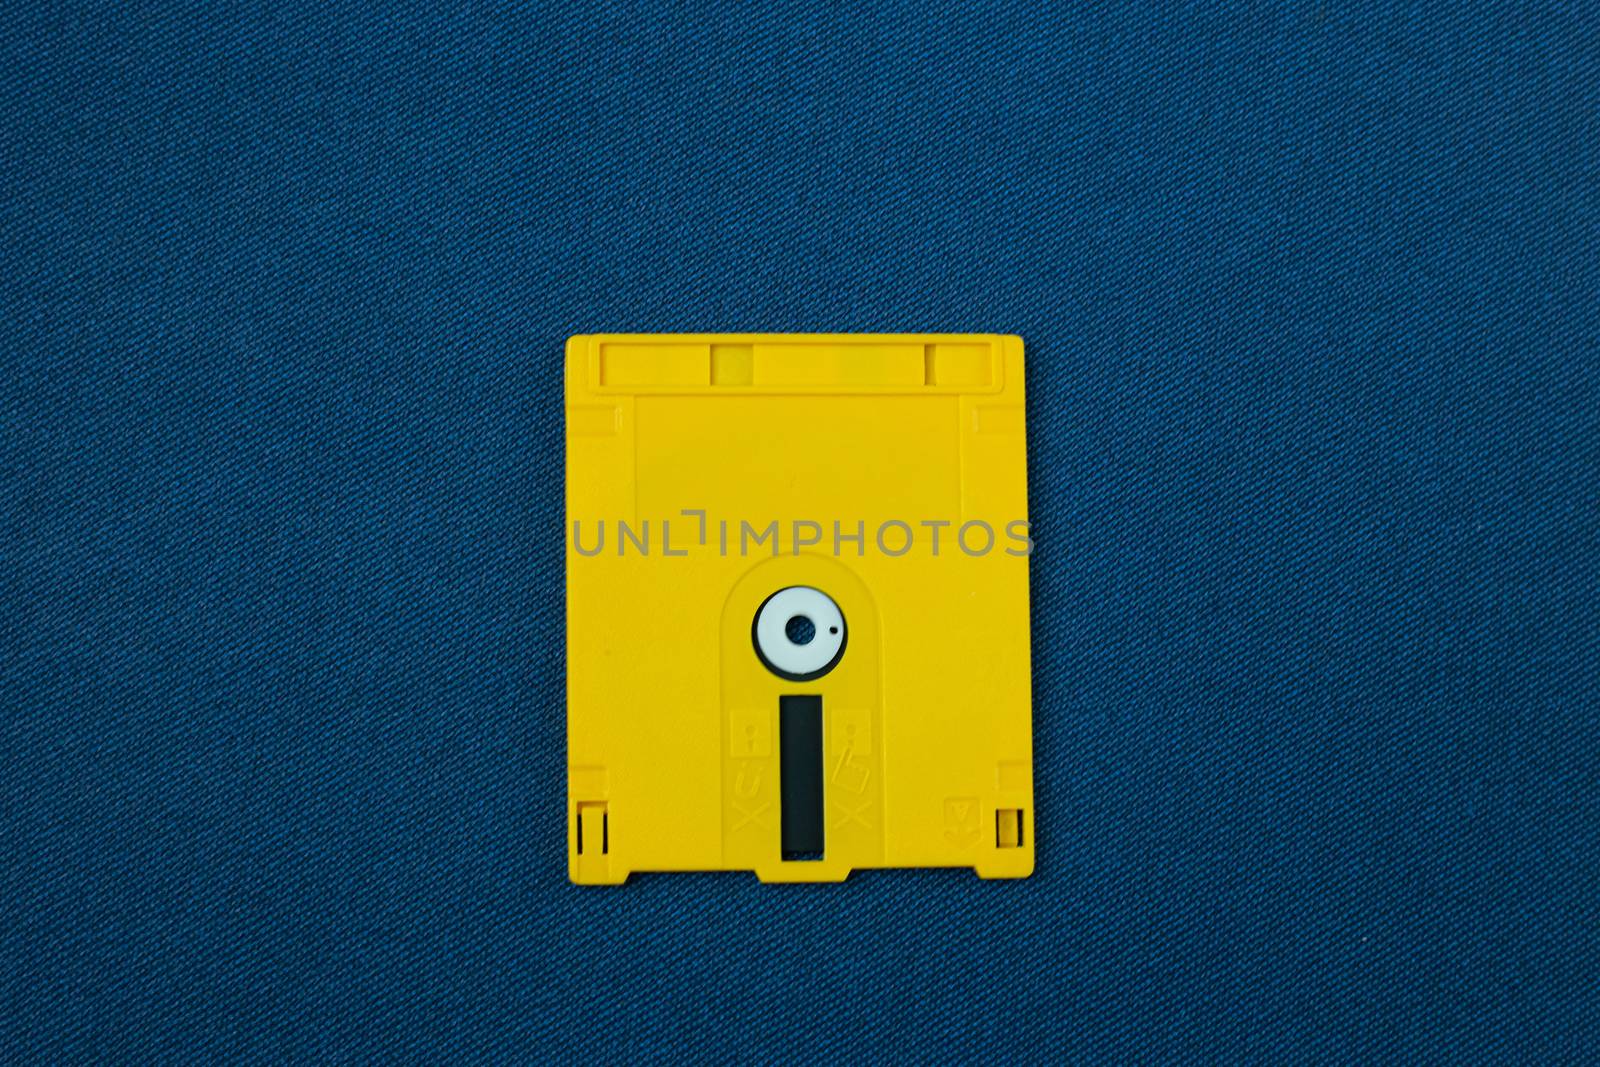 The diskette for disk system vintage technology image top view.